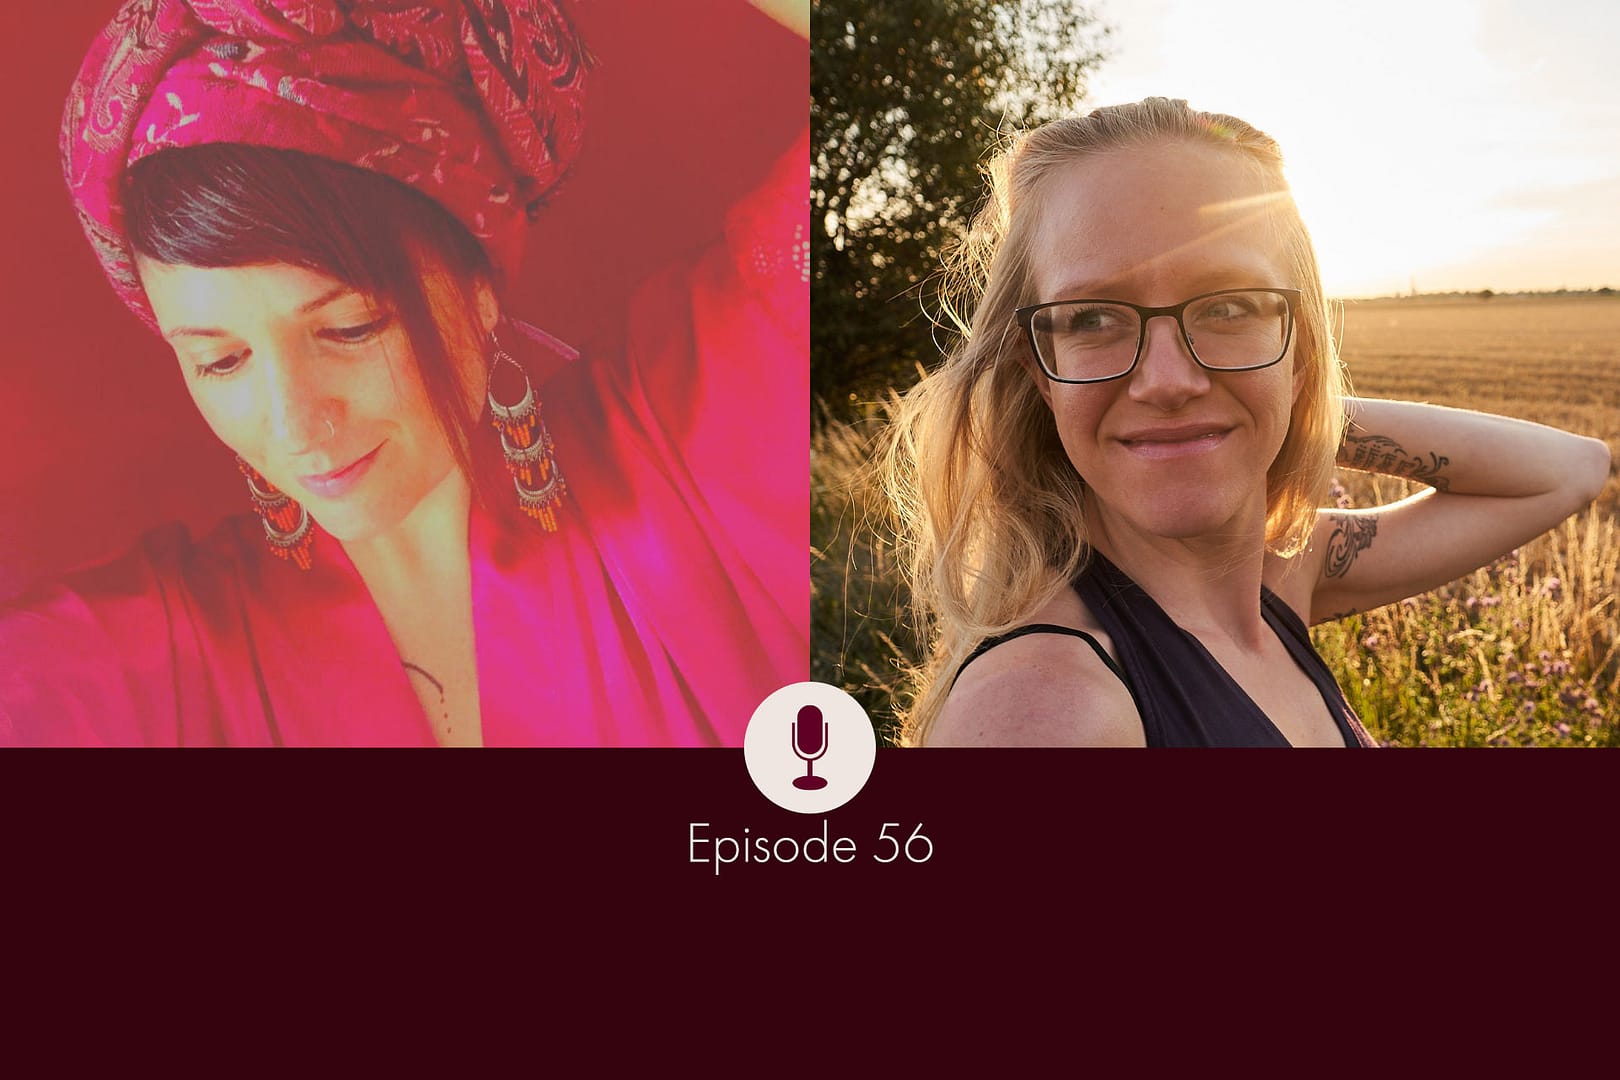 Image with a photo of Aurora Sunu, a white, dark-haired woman in pink headdress, and Lisa Jara, a white woman in purple shirt smiling confidently, text: Episode 56